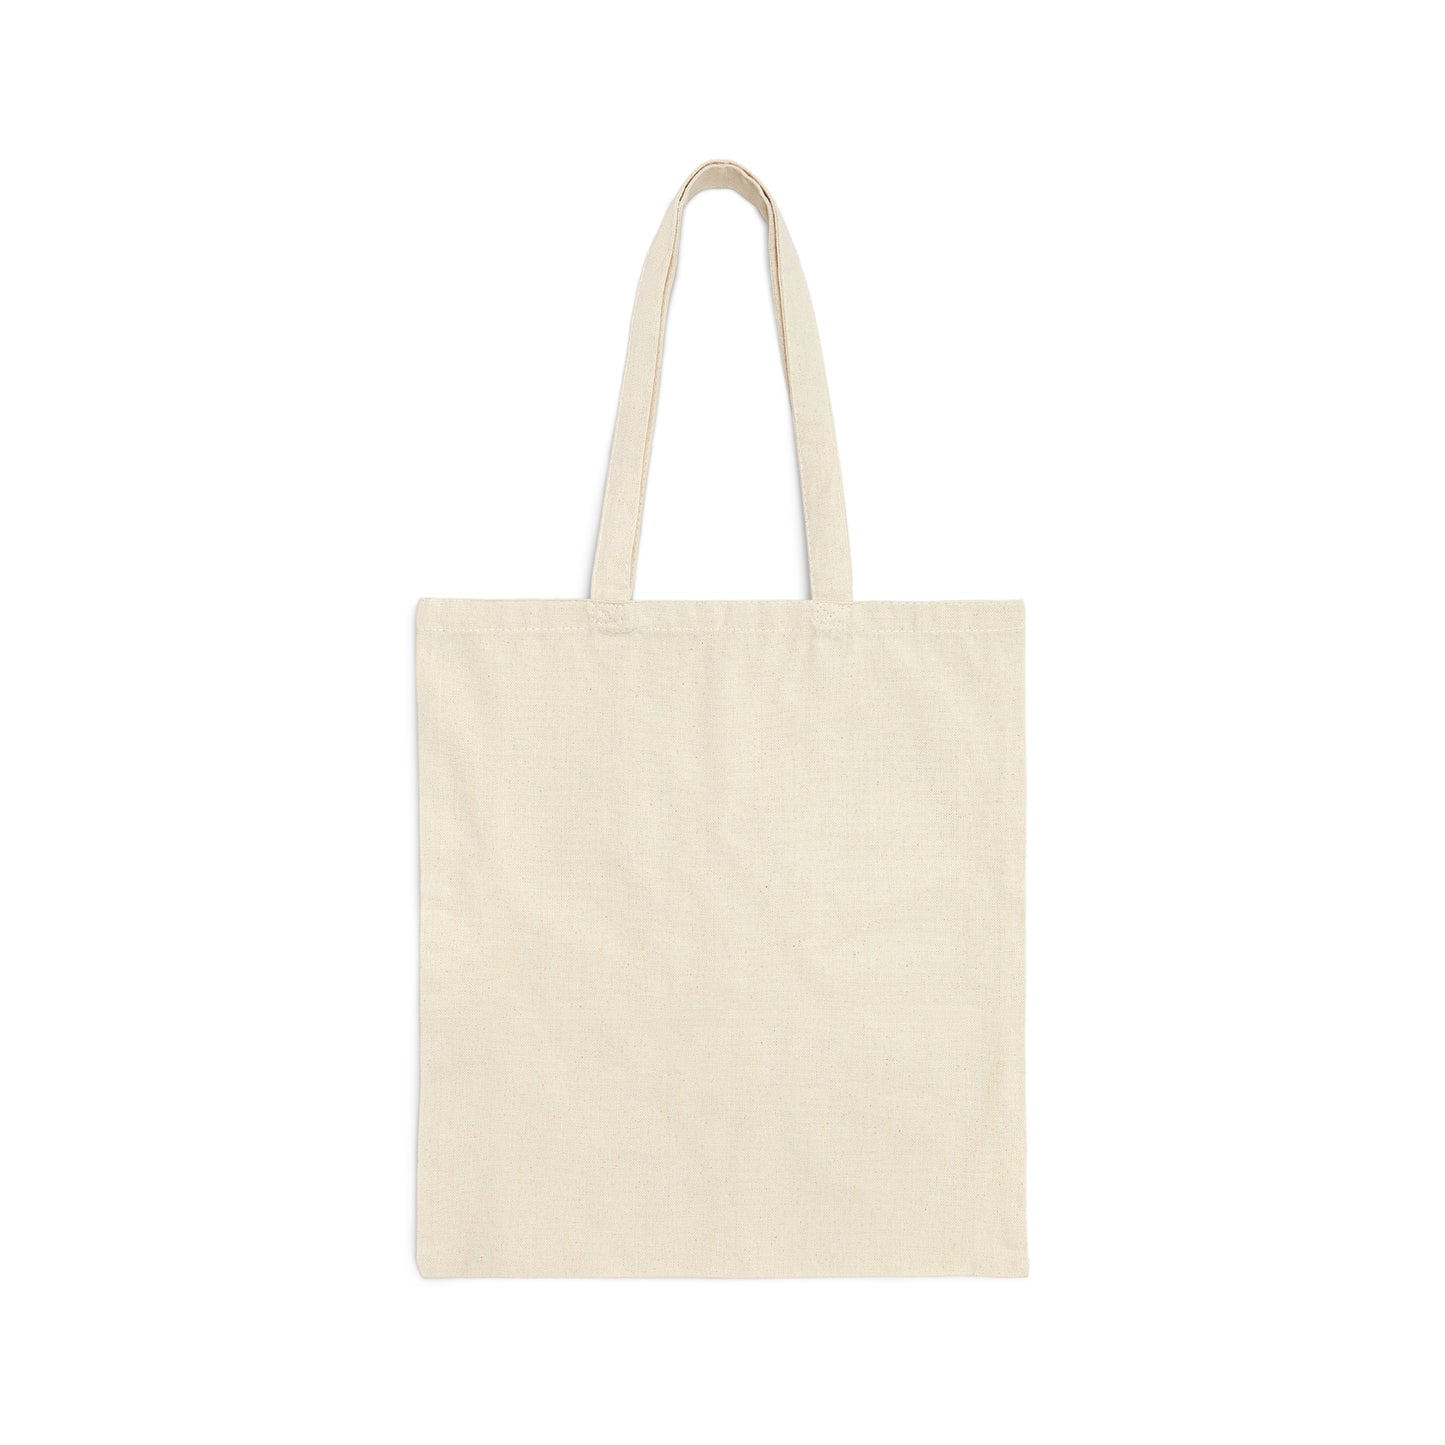 Sscarlet's Web Bookstore Tote